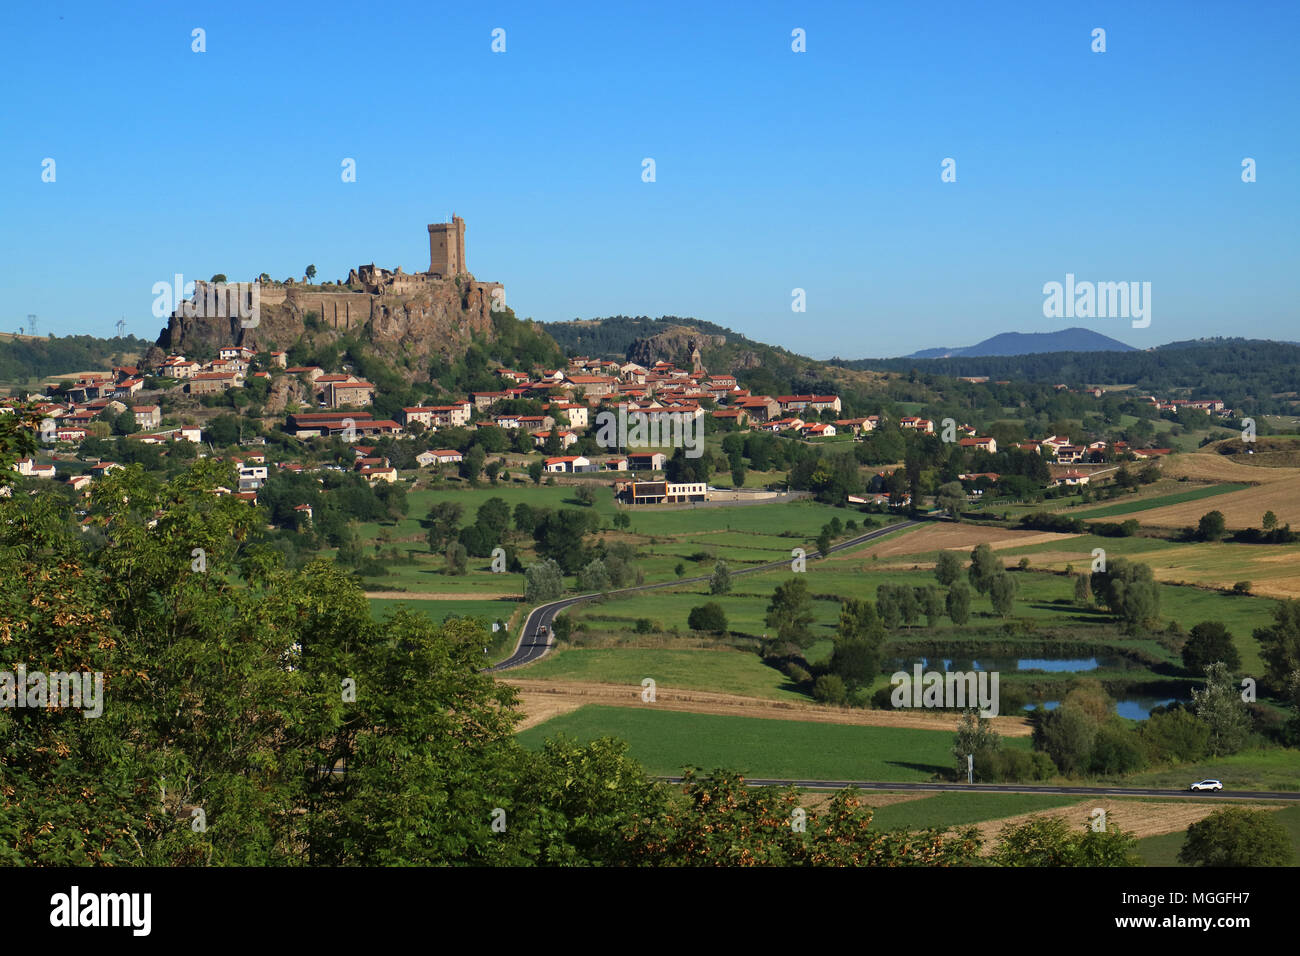 View of the town of Polignac, near le Puy-en-Velay,dominated by the 'Fortresse de Polignac' with its square donjon tower, 32 m tall, Auvergne, France Stock Photo